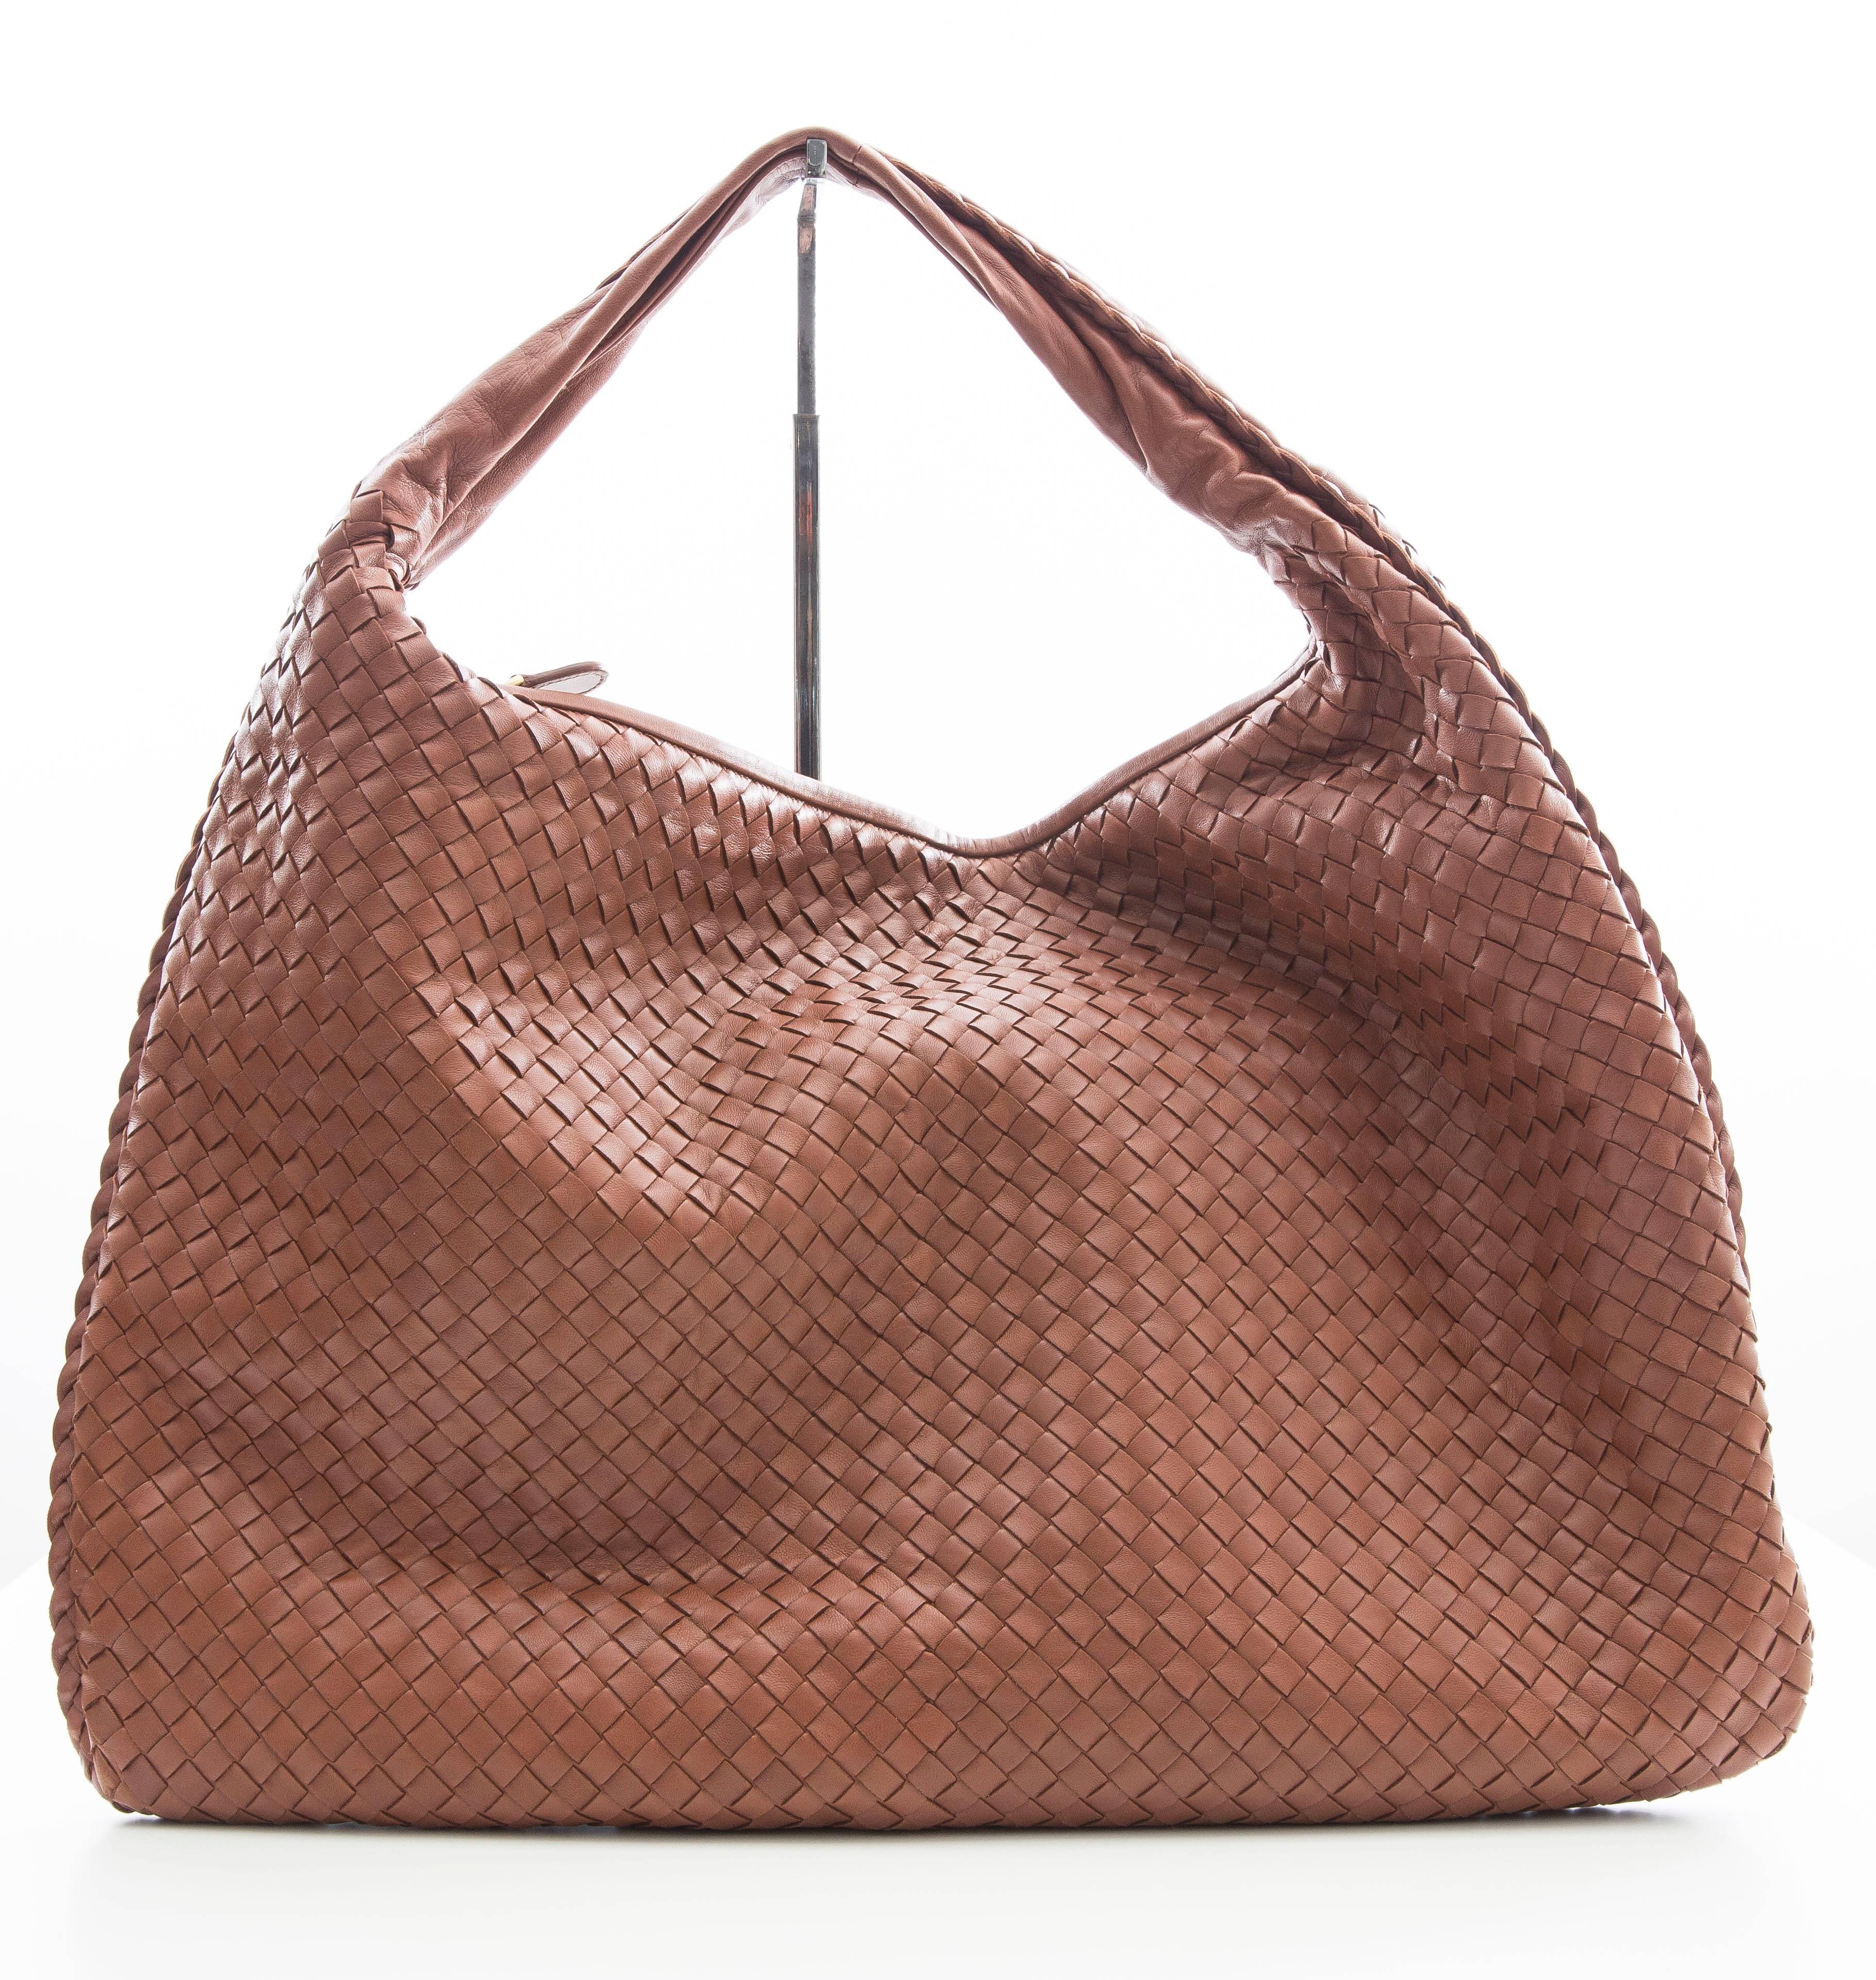 Bottega Veneta Large Intrecciato Hobo with flat shoulder strap, tonal stitching throughout, suede lining, dual pockets at interior walls; one featuring zip closure and zip closure at top. Includes dust bag.

Shoulder Strap Drop 7”, Height 12”,